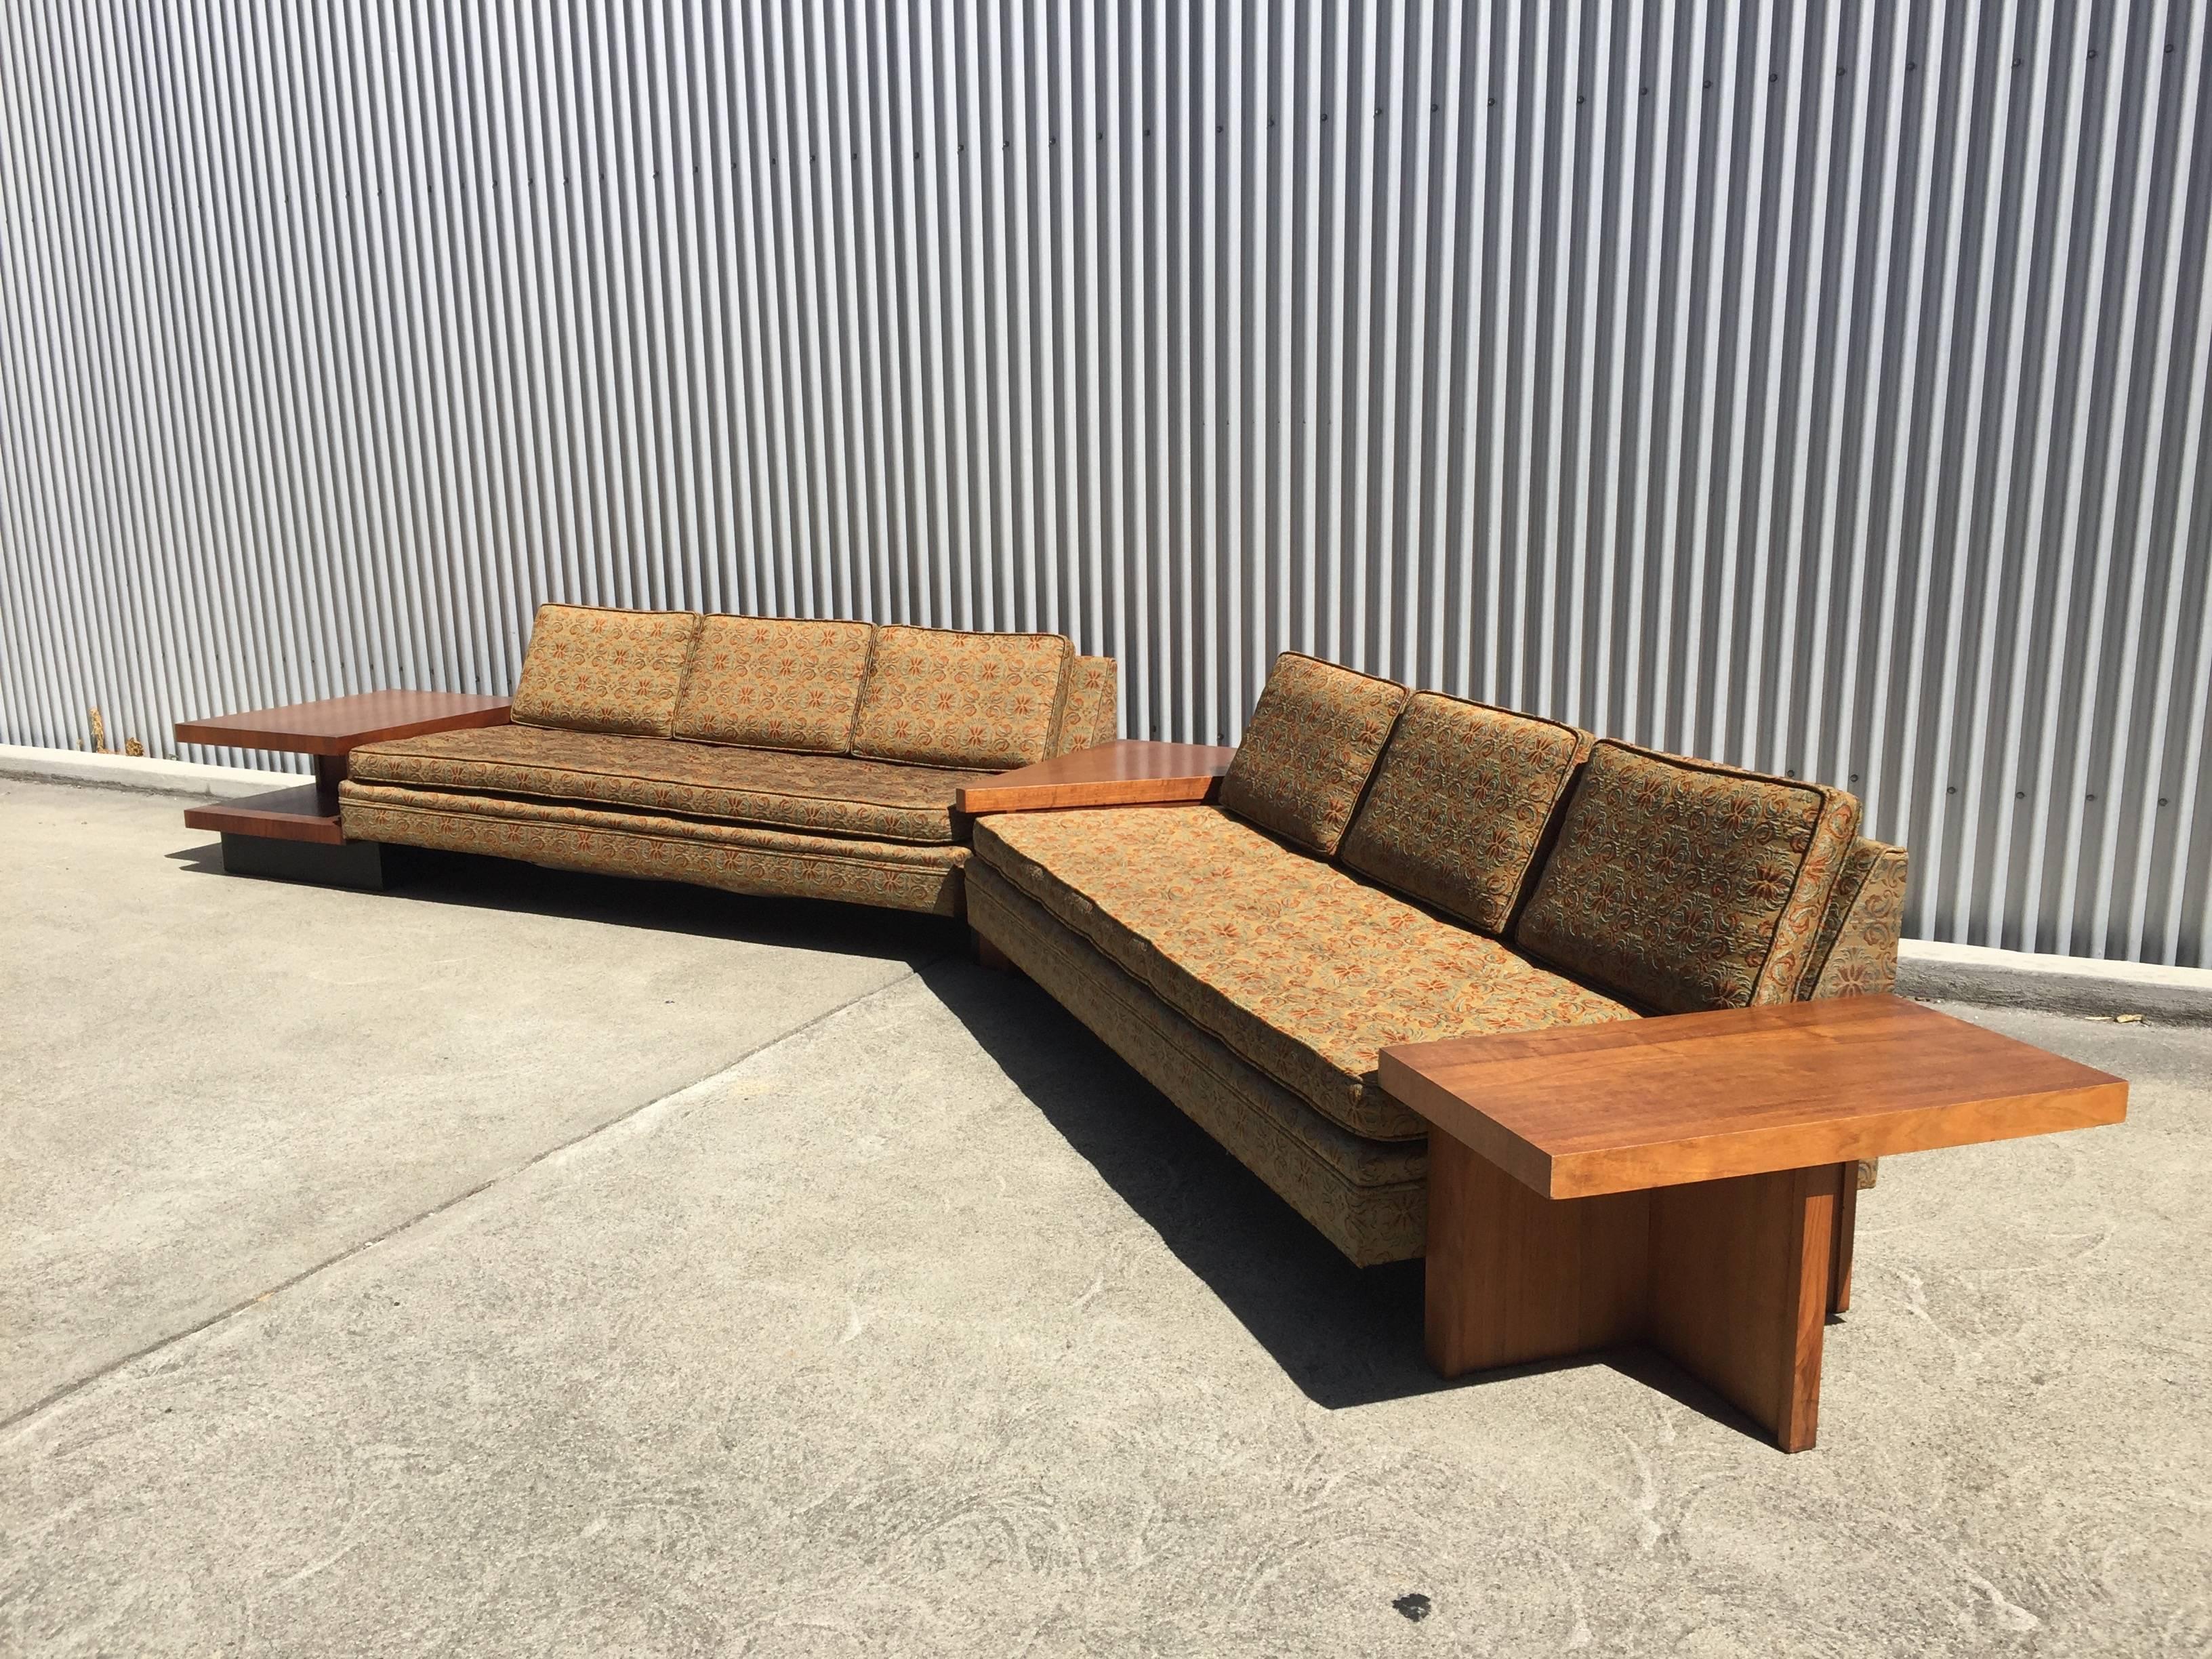 1960s MB designs sectional. Walnut and upholstery. Slim lined seating unit trimmed with walnut reveal around perimeter.

Enormous 16' dual sofa floating presence with an approximate 130 degree turning angle at centre. Embroidered fabric and foam